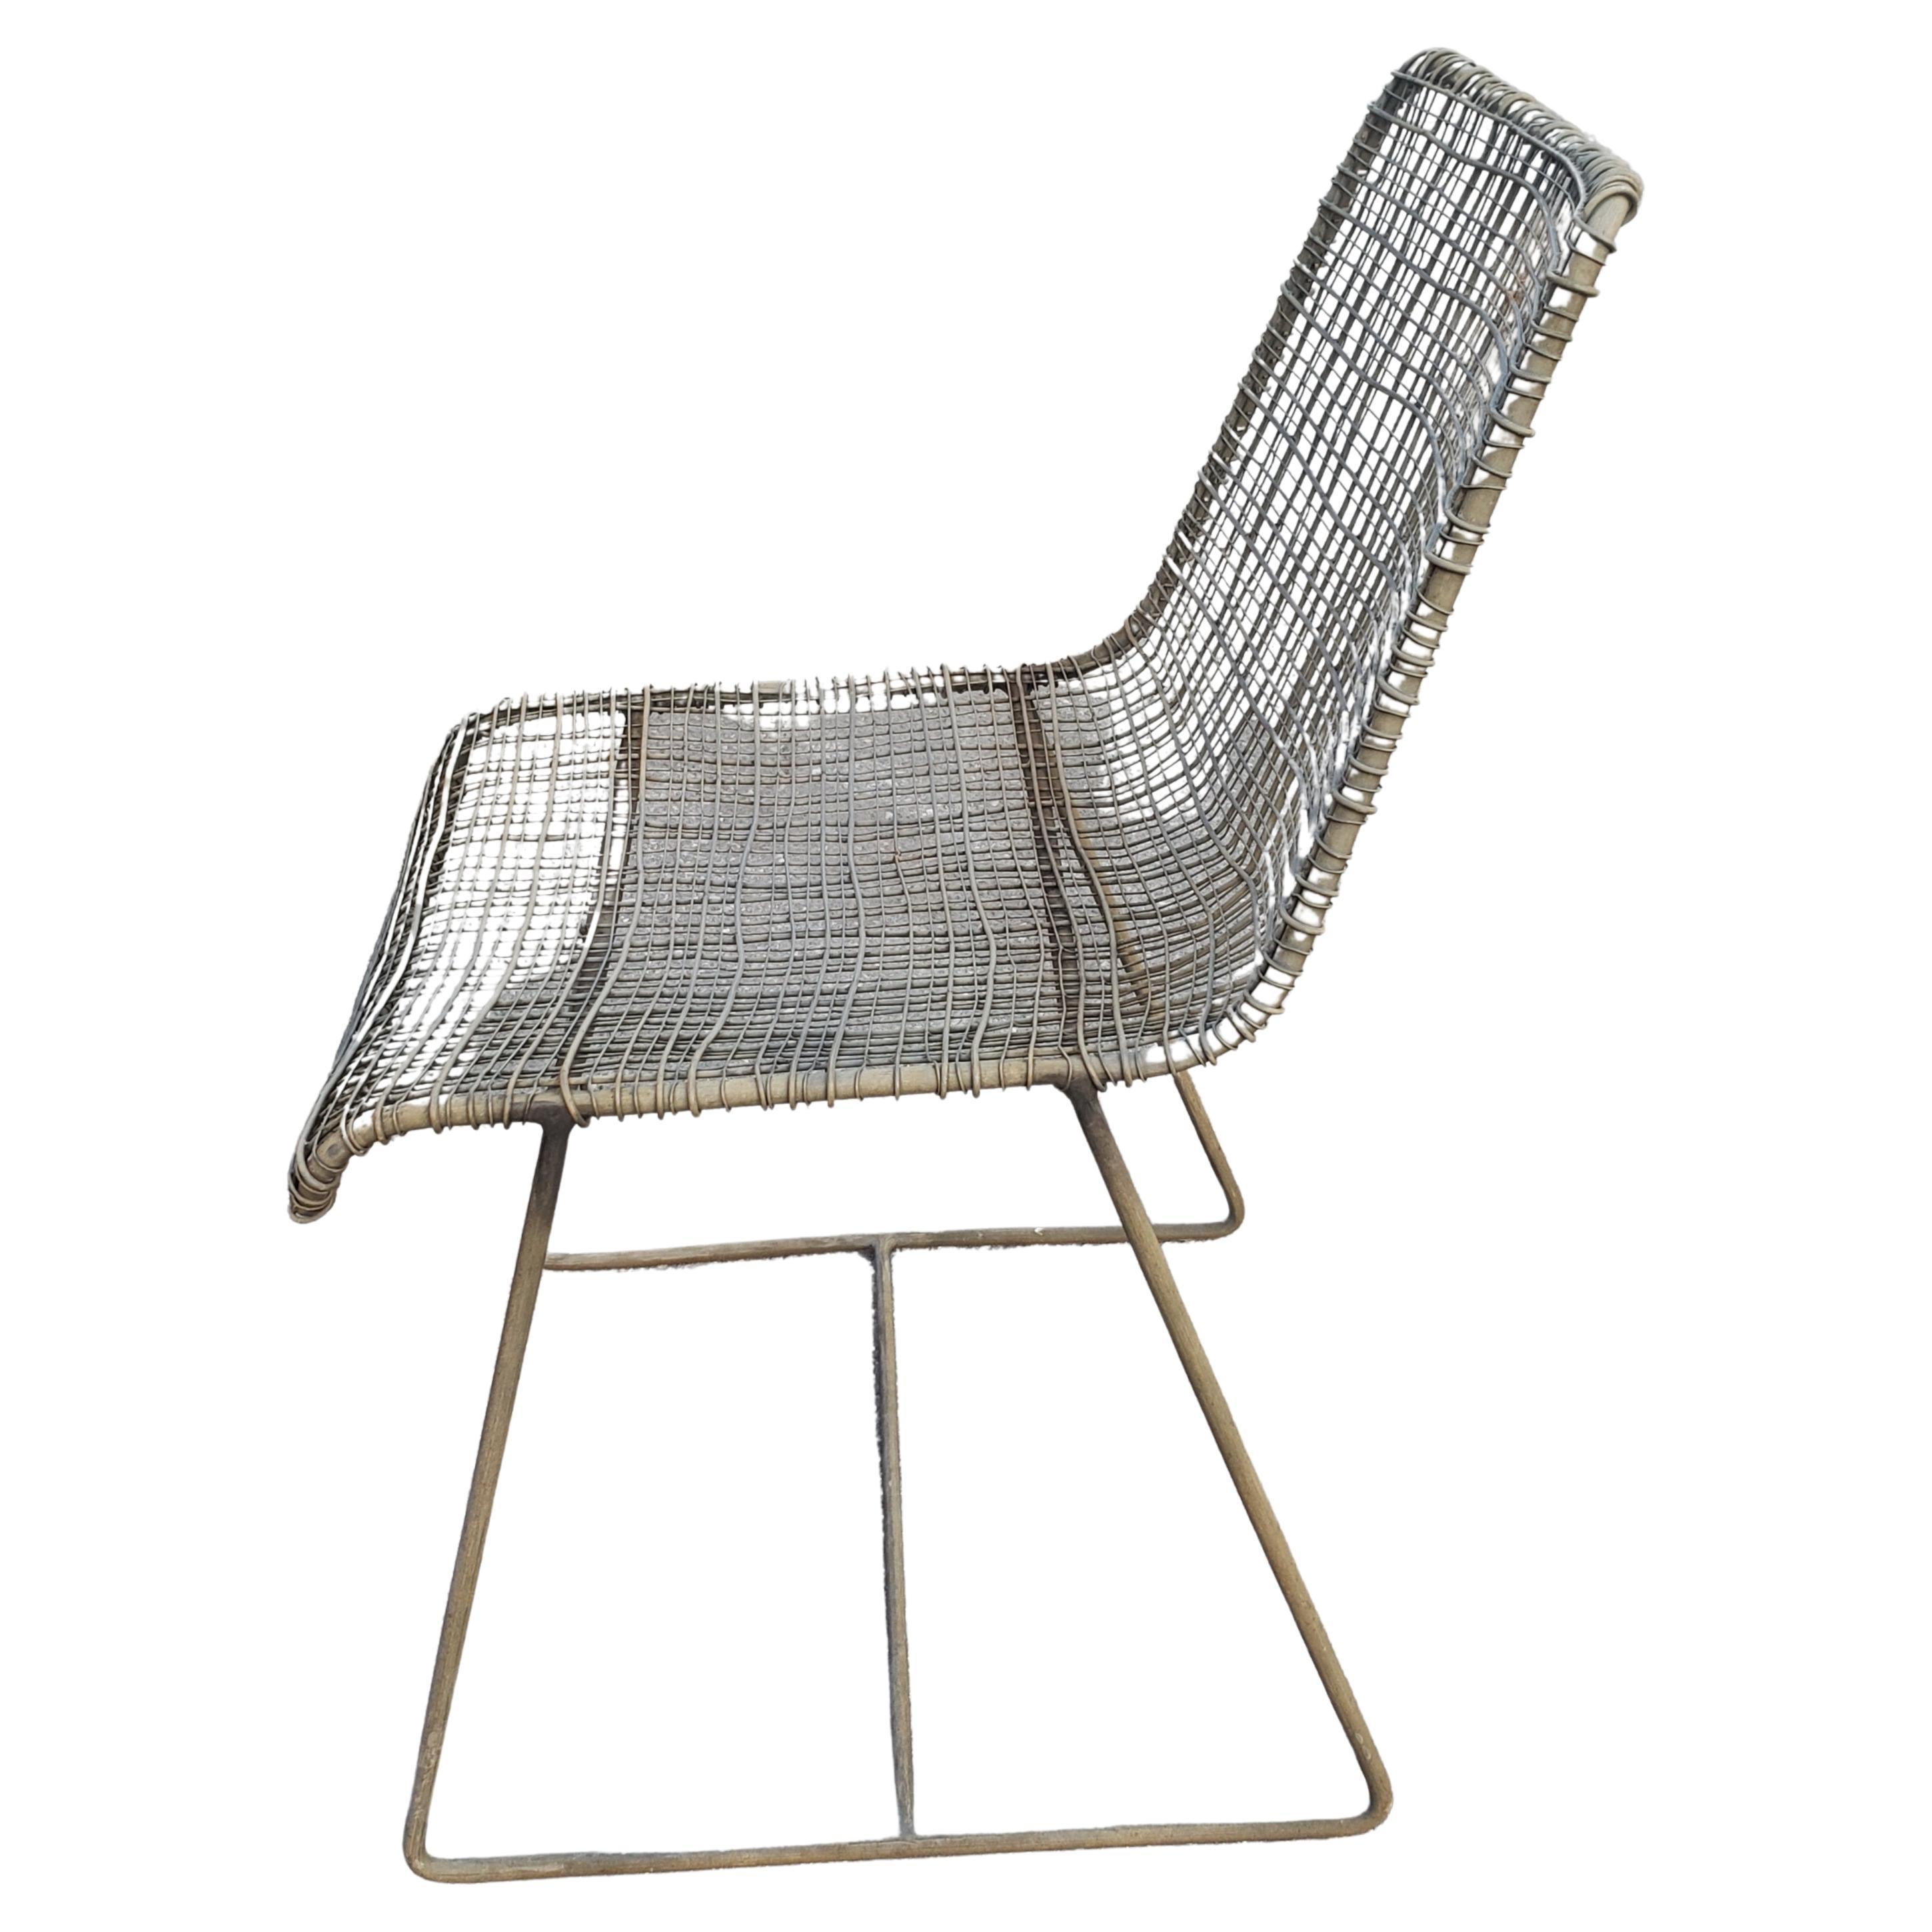 Comfortable, close to maintenance-free and with a style punch to accompany it, this BoConcept Style outdoor furniture is the perfect setting for great outdoor moments. With a light, sophisticated look, this outdoor lounge chair creates a welcoming,